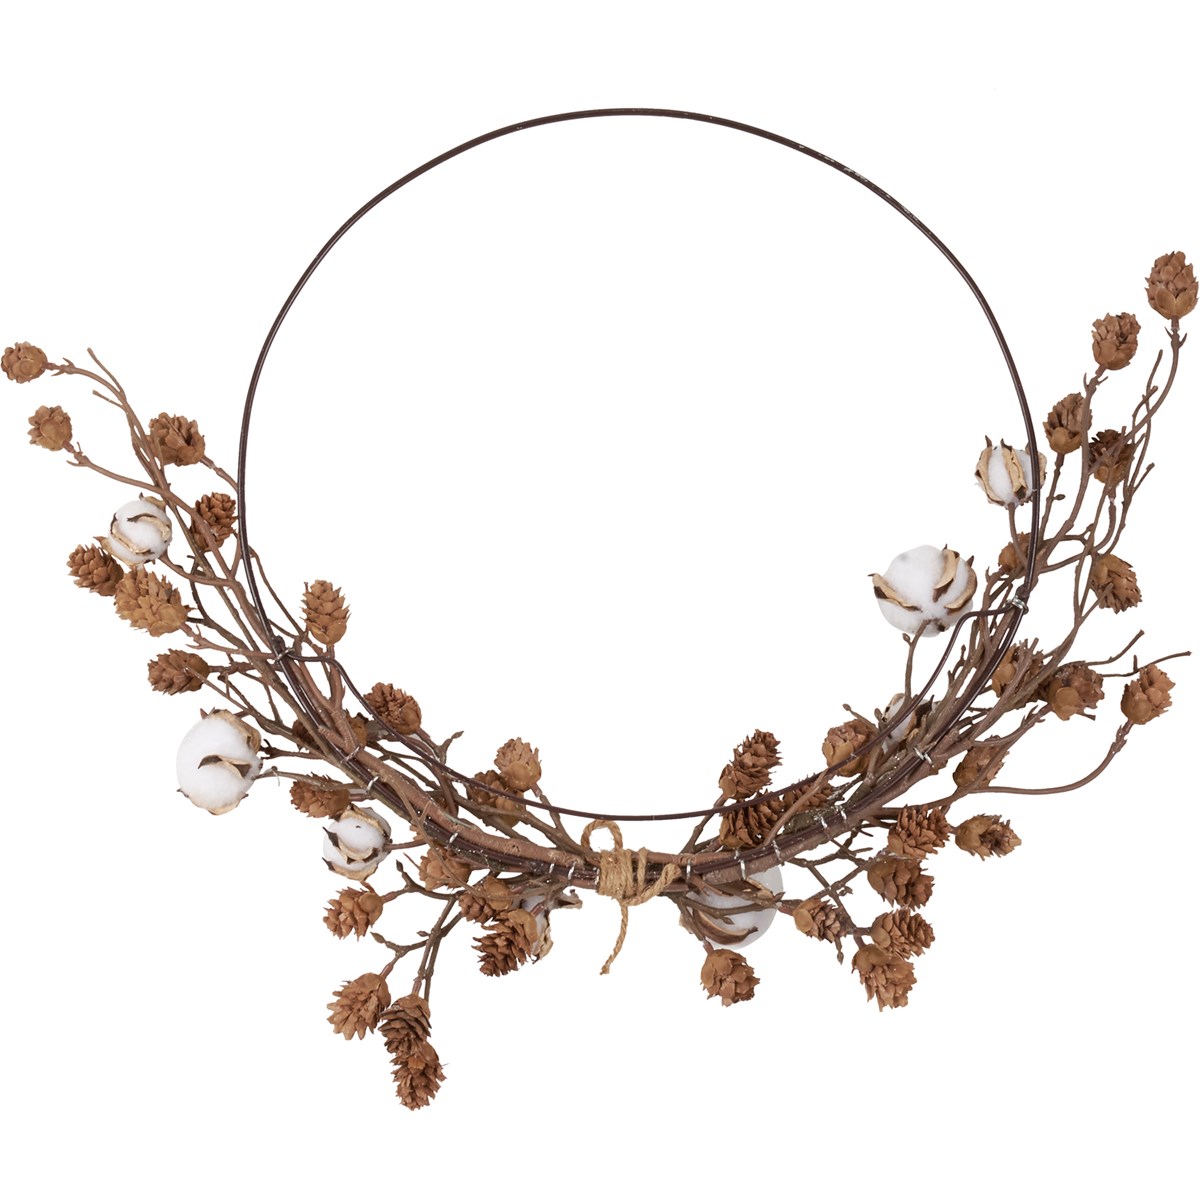 Pinecones And Cotton Ring Wreath - Metal, Plastic, Wire, Wood, Pinecones, Glitter